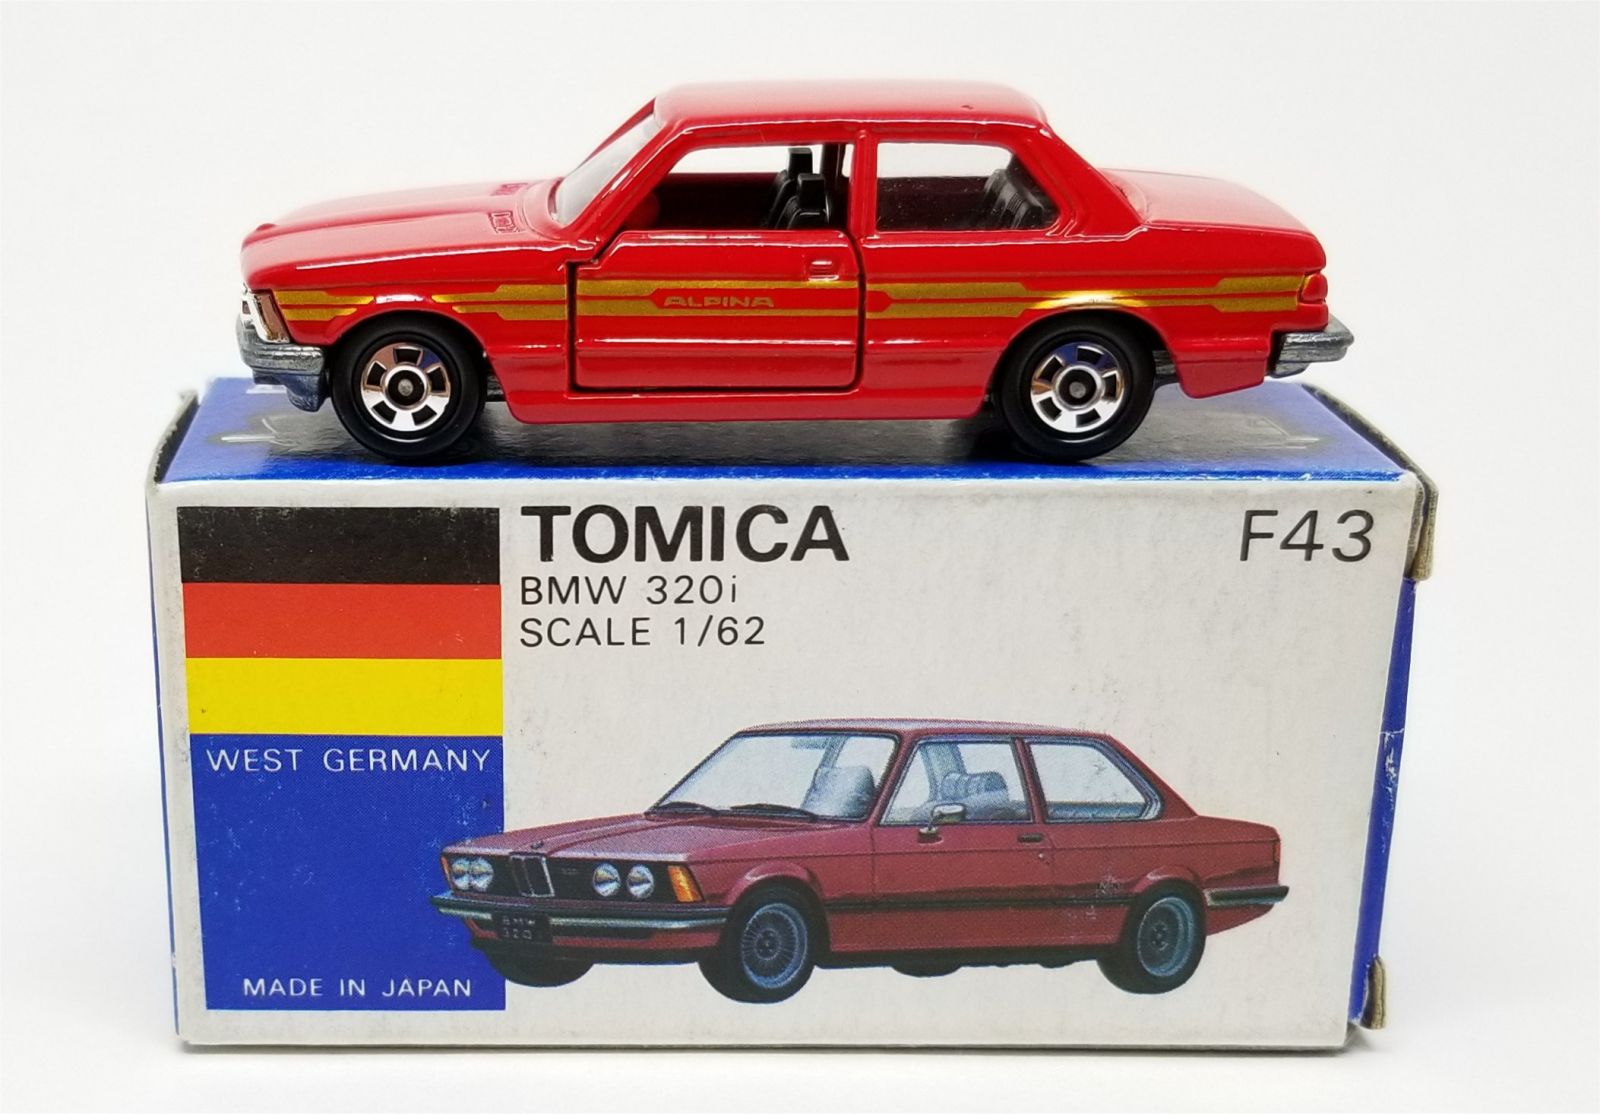 Illustration for article titled LaLD ///May: Tomica BMW 320i Alpina